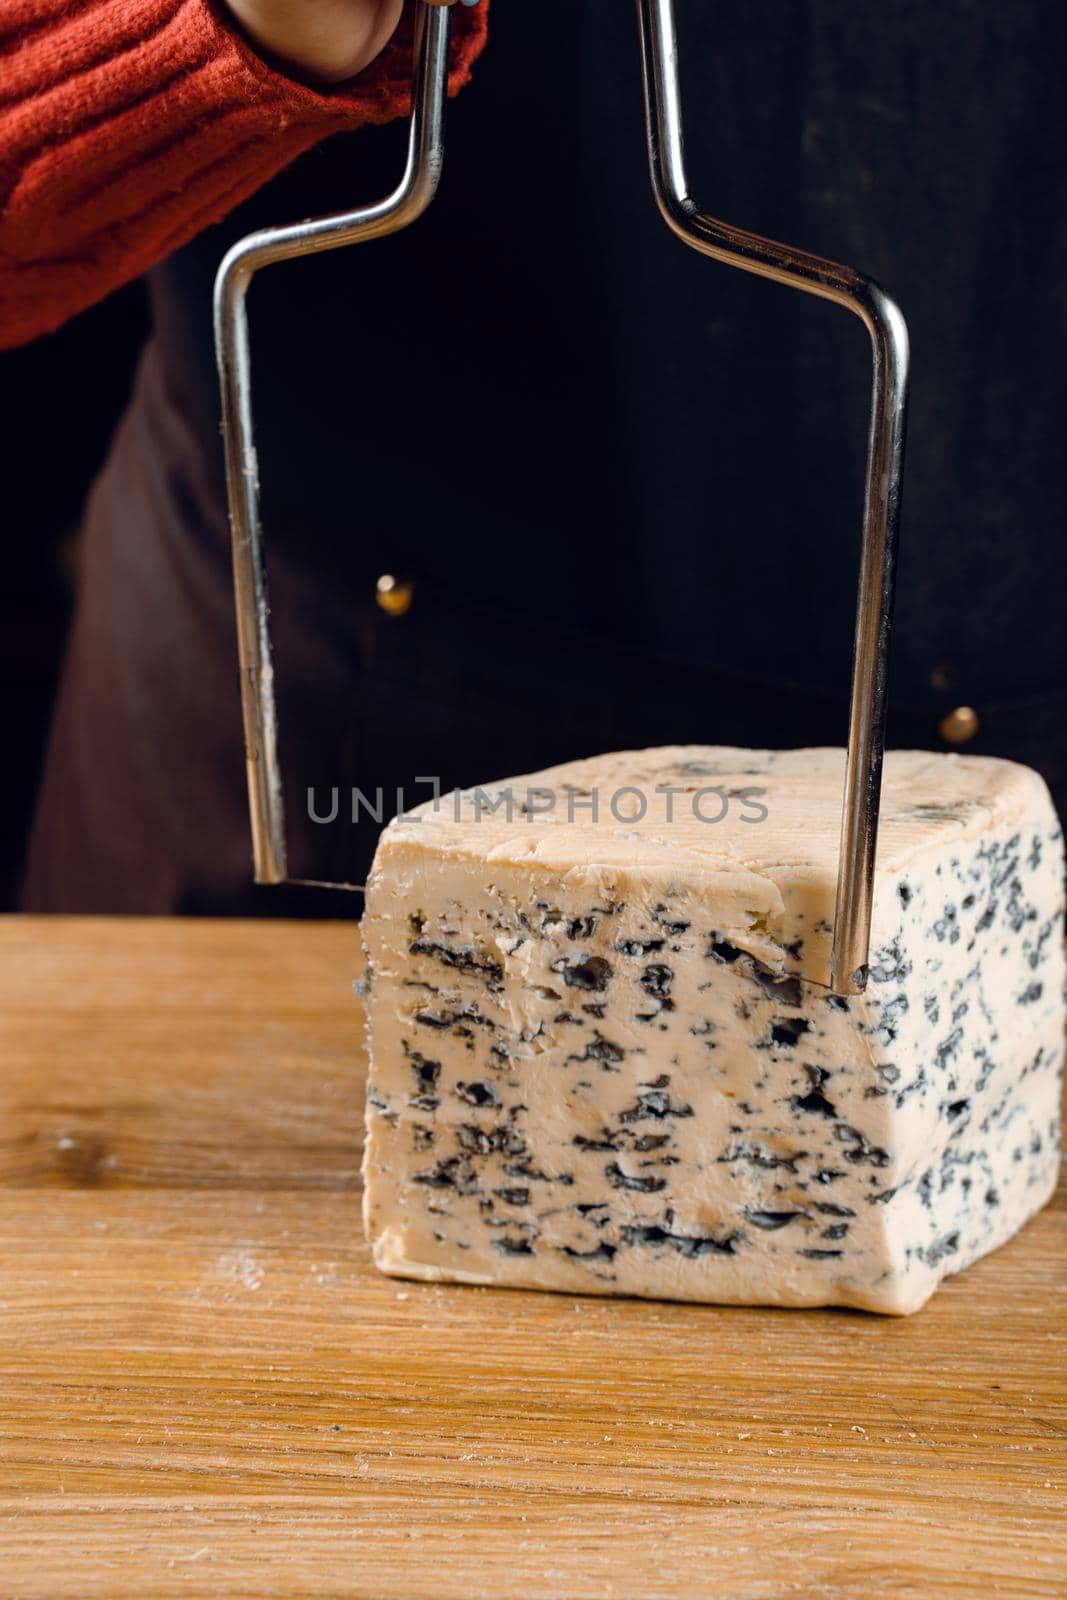 String for slicing blue cheese. Mix of cheeses on plate. Slicing dorblu, gorgonzola, roquefort. French gourmet cuisine